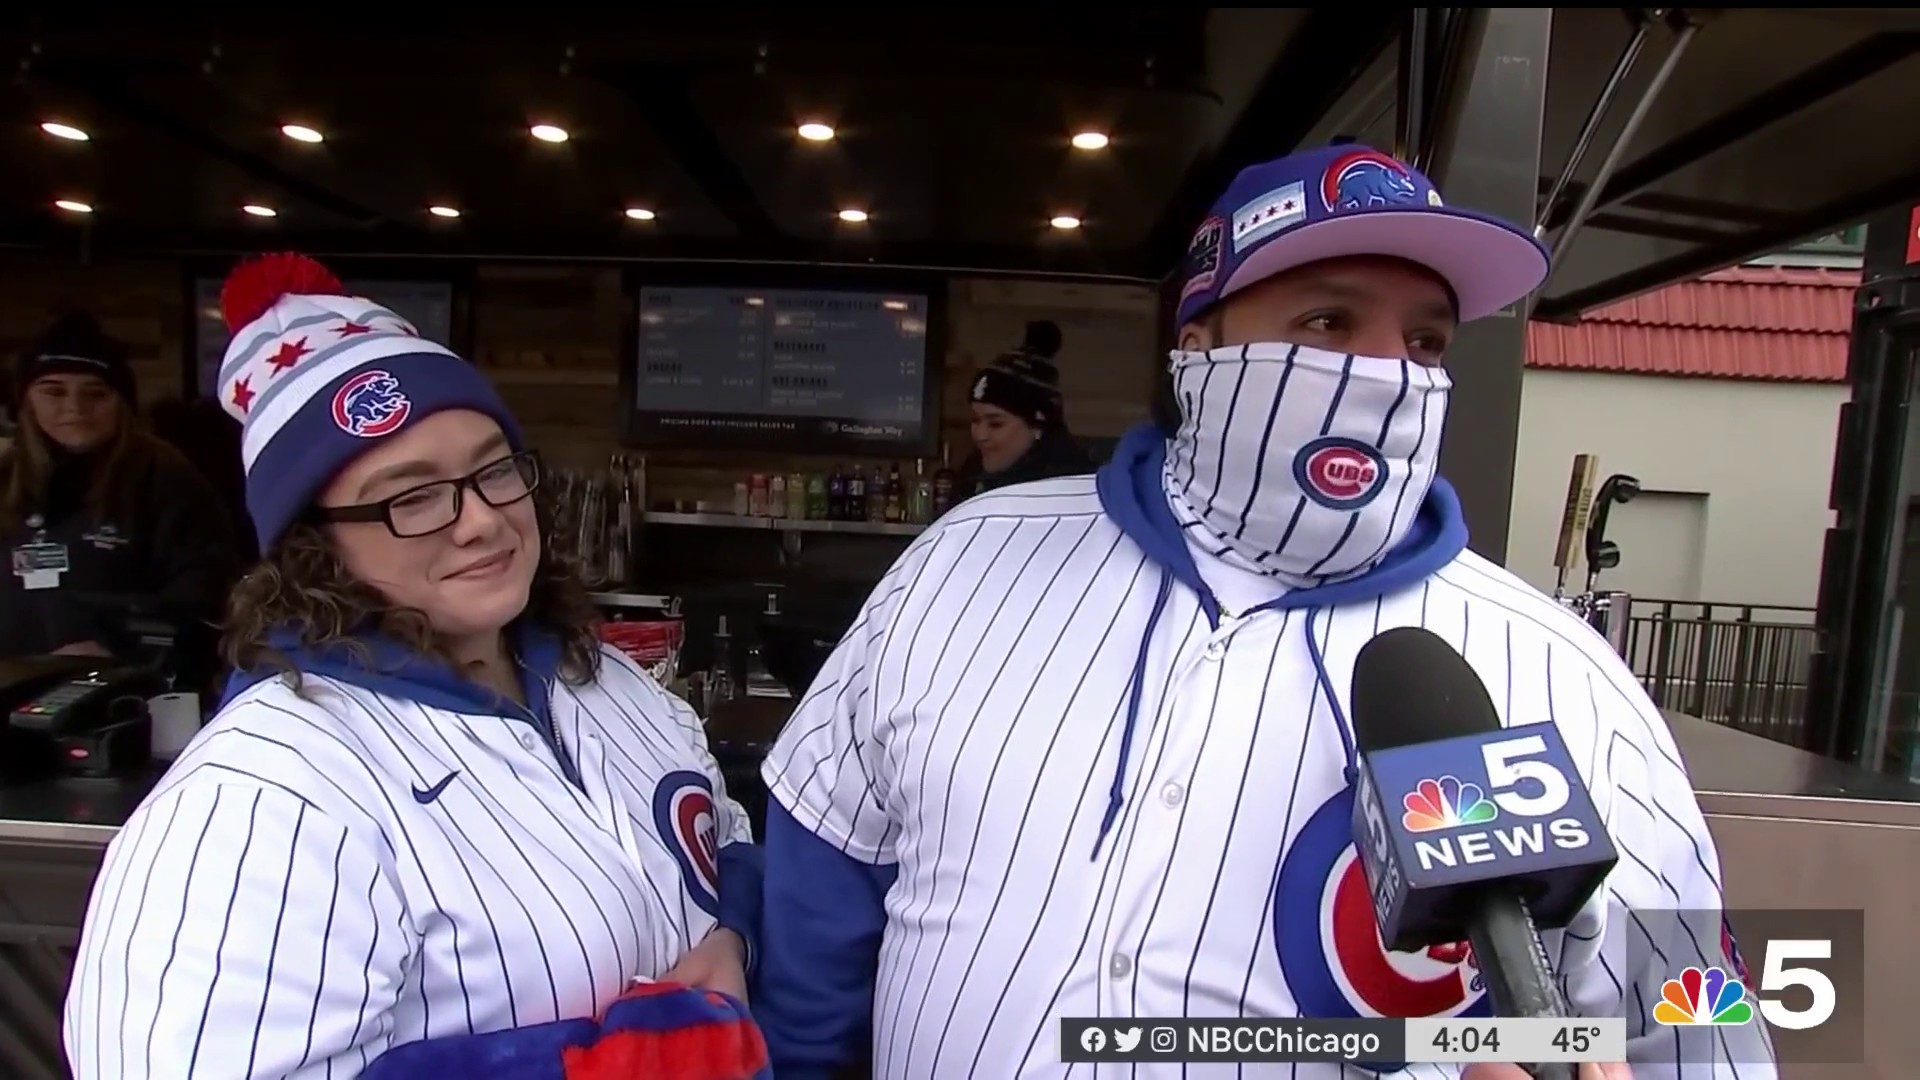 Despite Cold, Cubs Fans Thrilled to be Back at Wrigley Field for Opening  Day – NBC Chicago